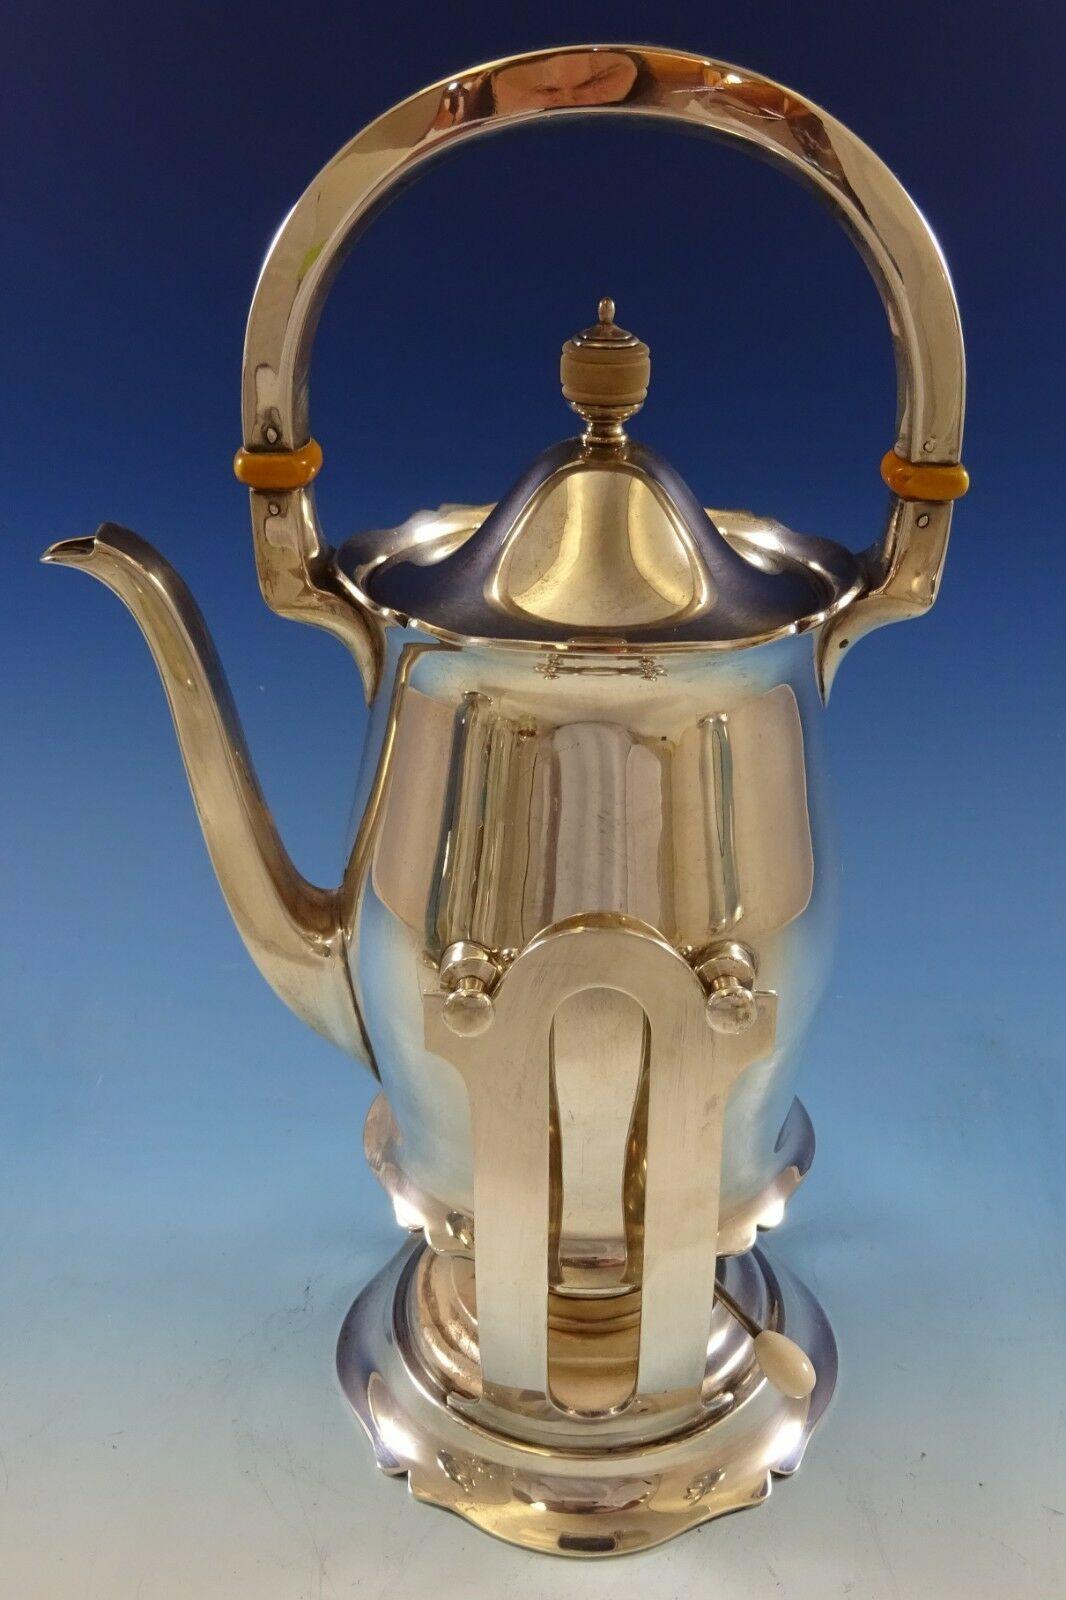 Antique by Wallace
Stunning Antique by Wallace sterling silver 6-piece tea set marked #3370. The set includes:
1 - Kettle on stand: Measures 8 1/2 x 13 3/4 and weighs 63.2 troy ounces.
1 - Coffee pot: Measures 8 1/2 x 9 1/2 and weighs 29 troy